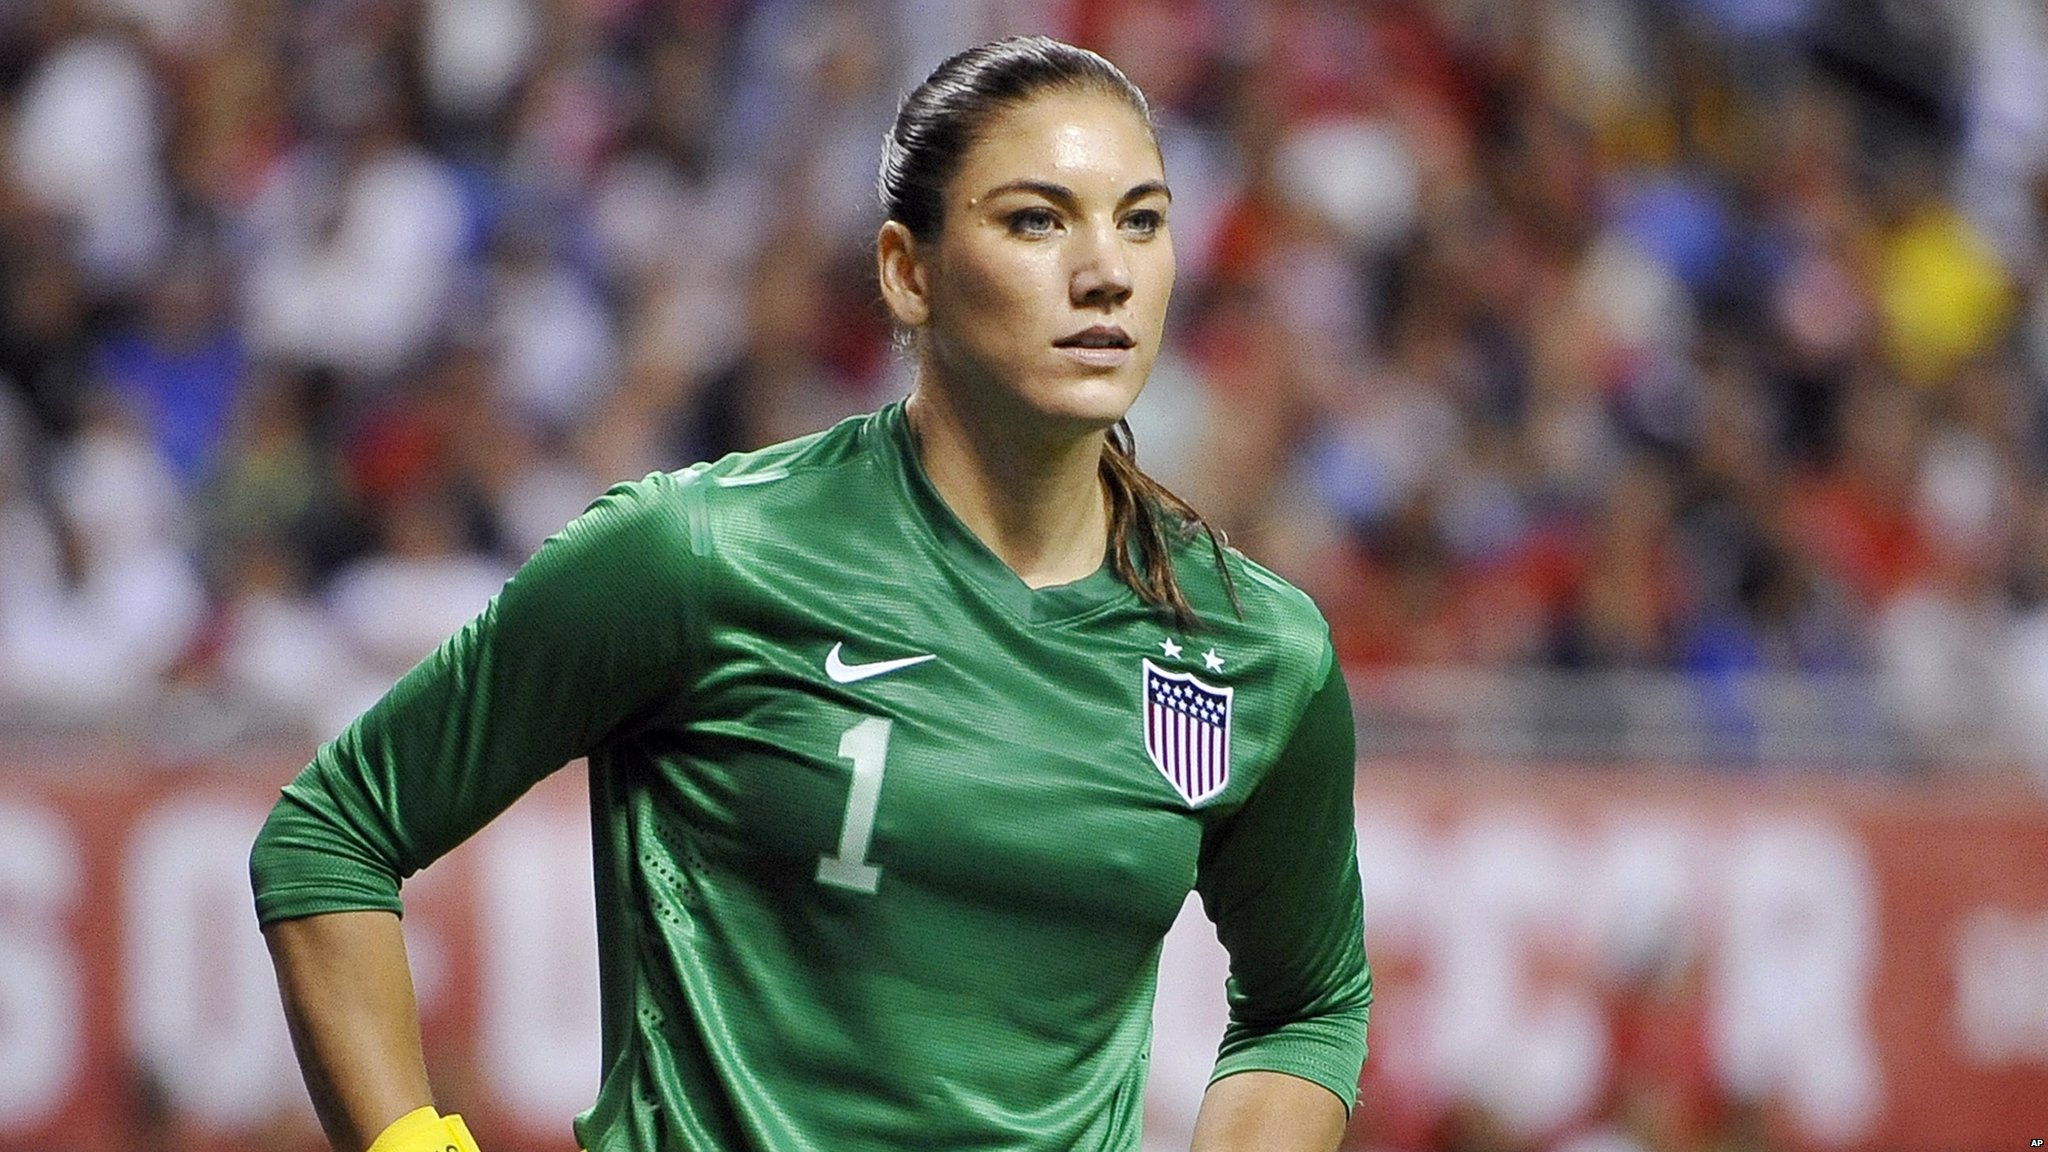 dale venables recommends Hope Solo Naked Photos